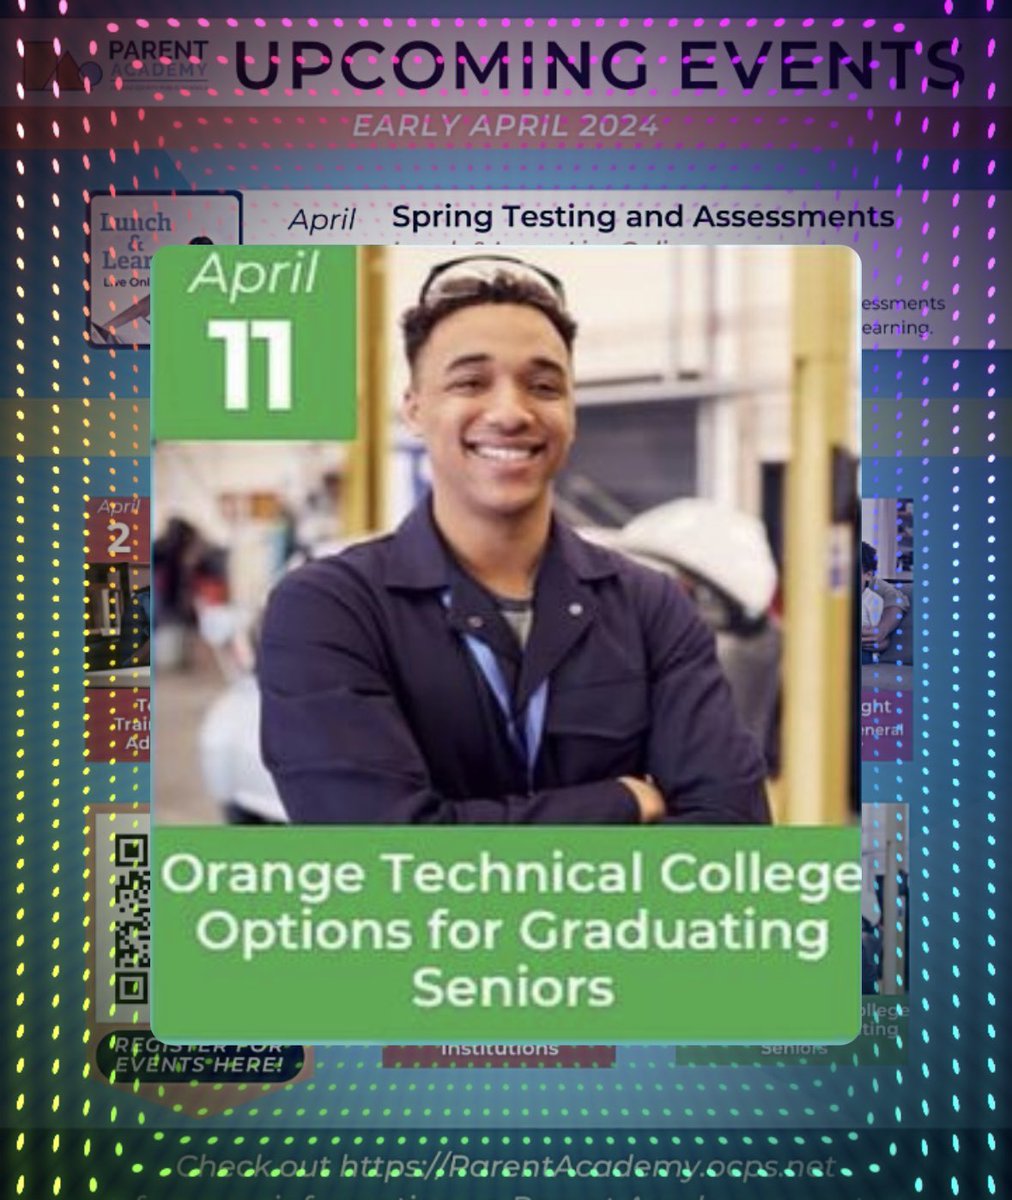 Seniors and parents, log on tonight at 6 p.m. to learn all about education options at @ocpsotc! Get registration link at parentacademy.ocps.net! #ocps #graduation